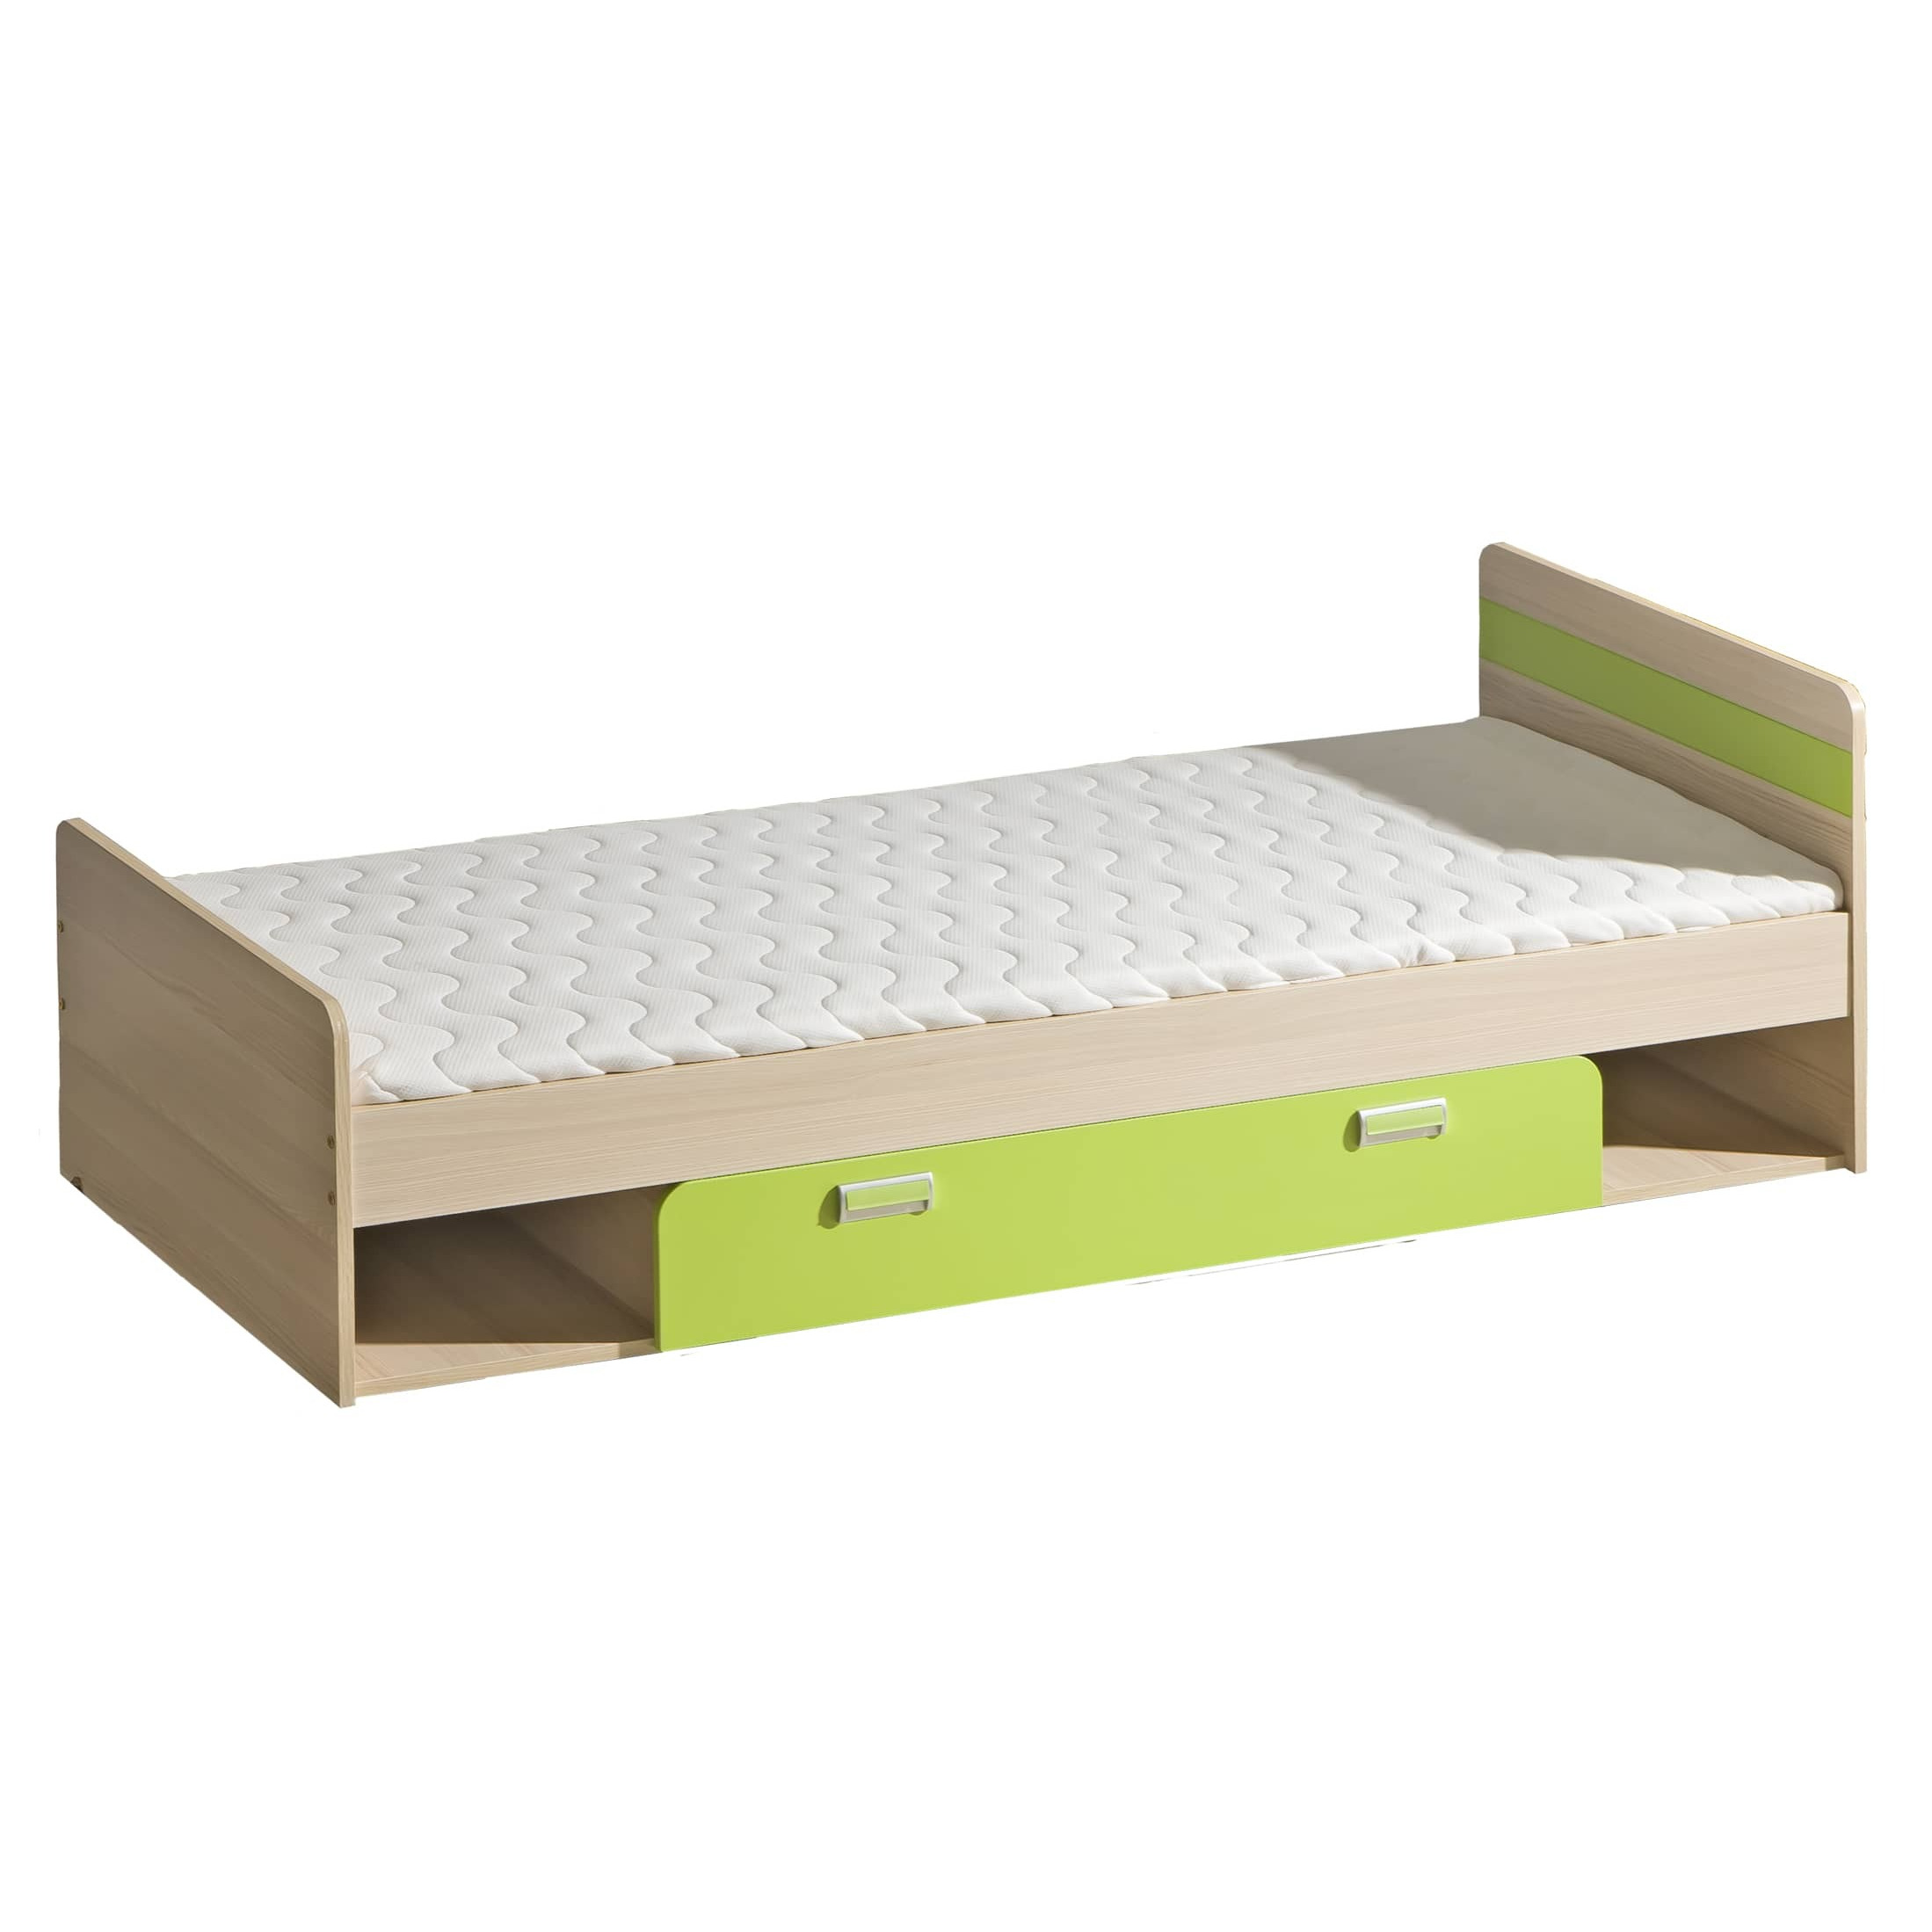 Lorento L13 Bed with Drawer - Ash Coimbra Green 80 x 195cm - image 1